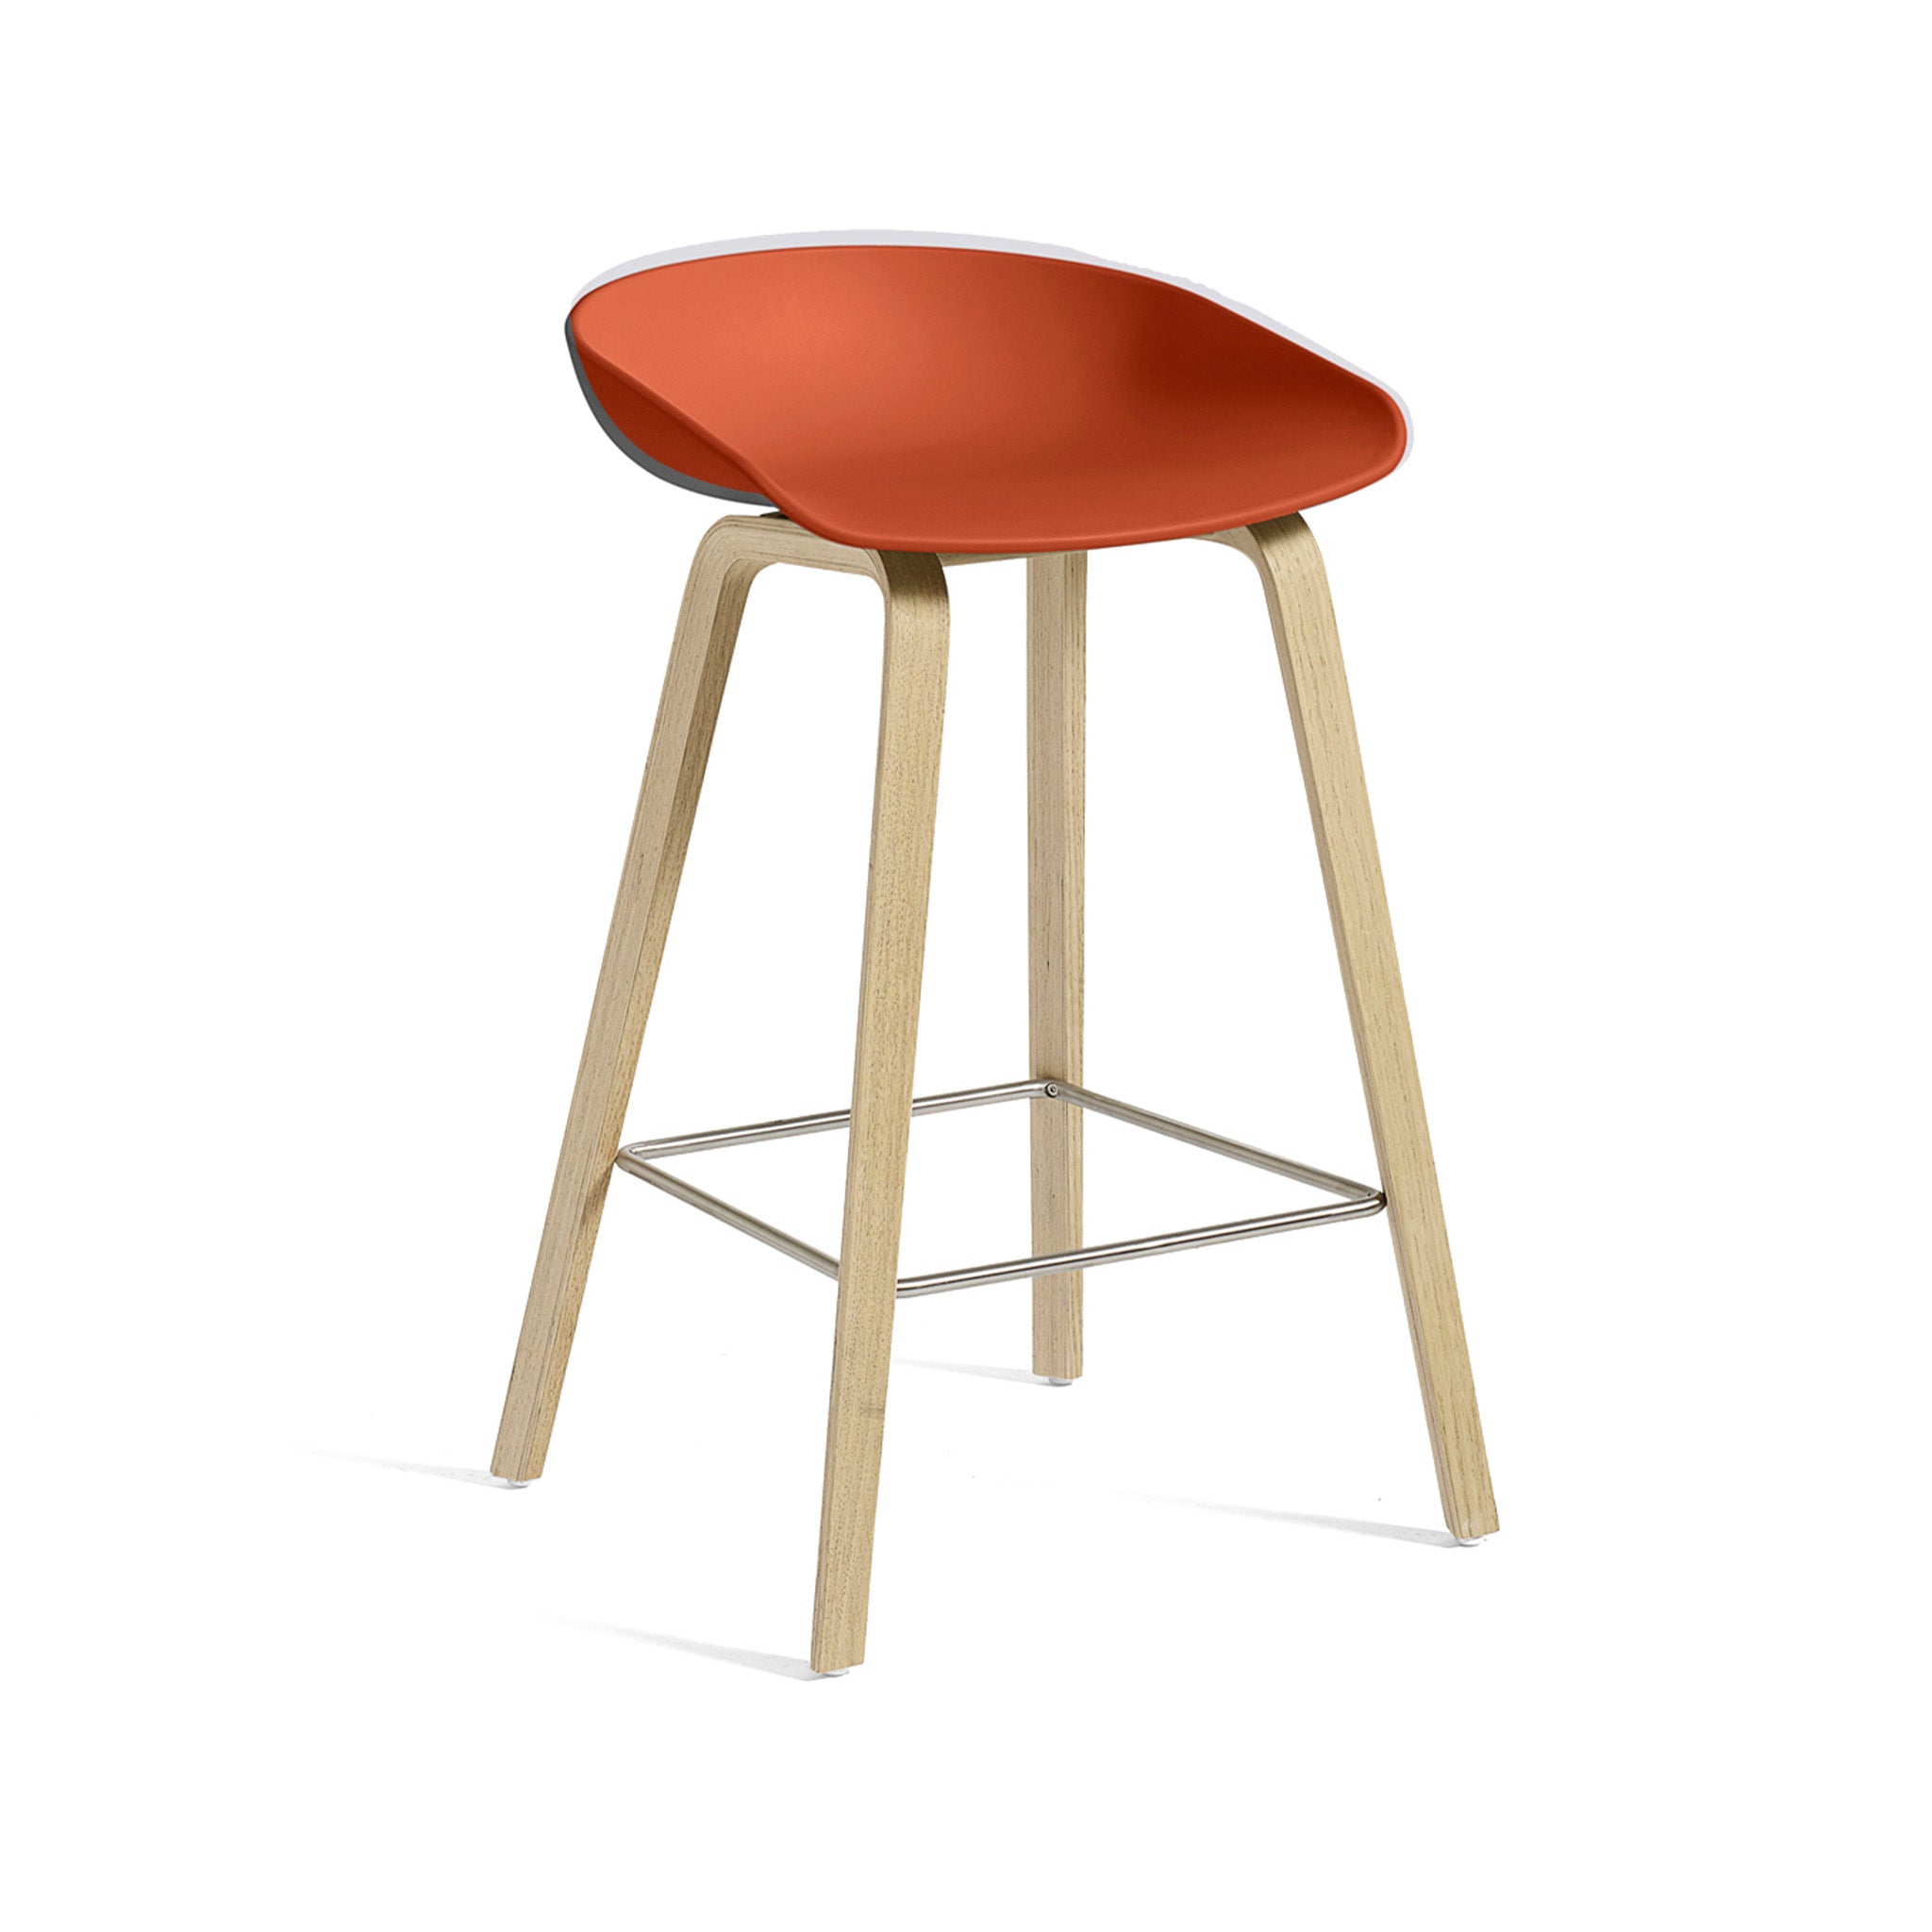 Clearance About a Stool AAS 32 Low / Orange / Matt Lacquered Oak by Hay